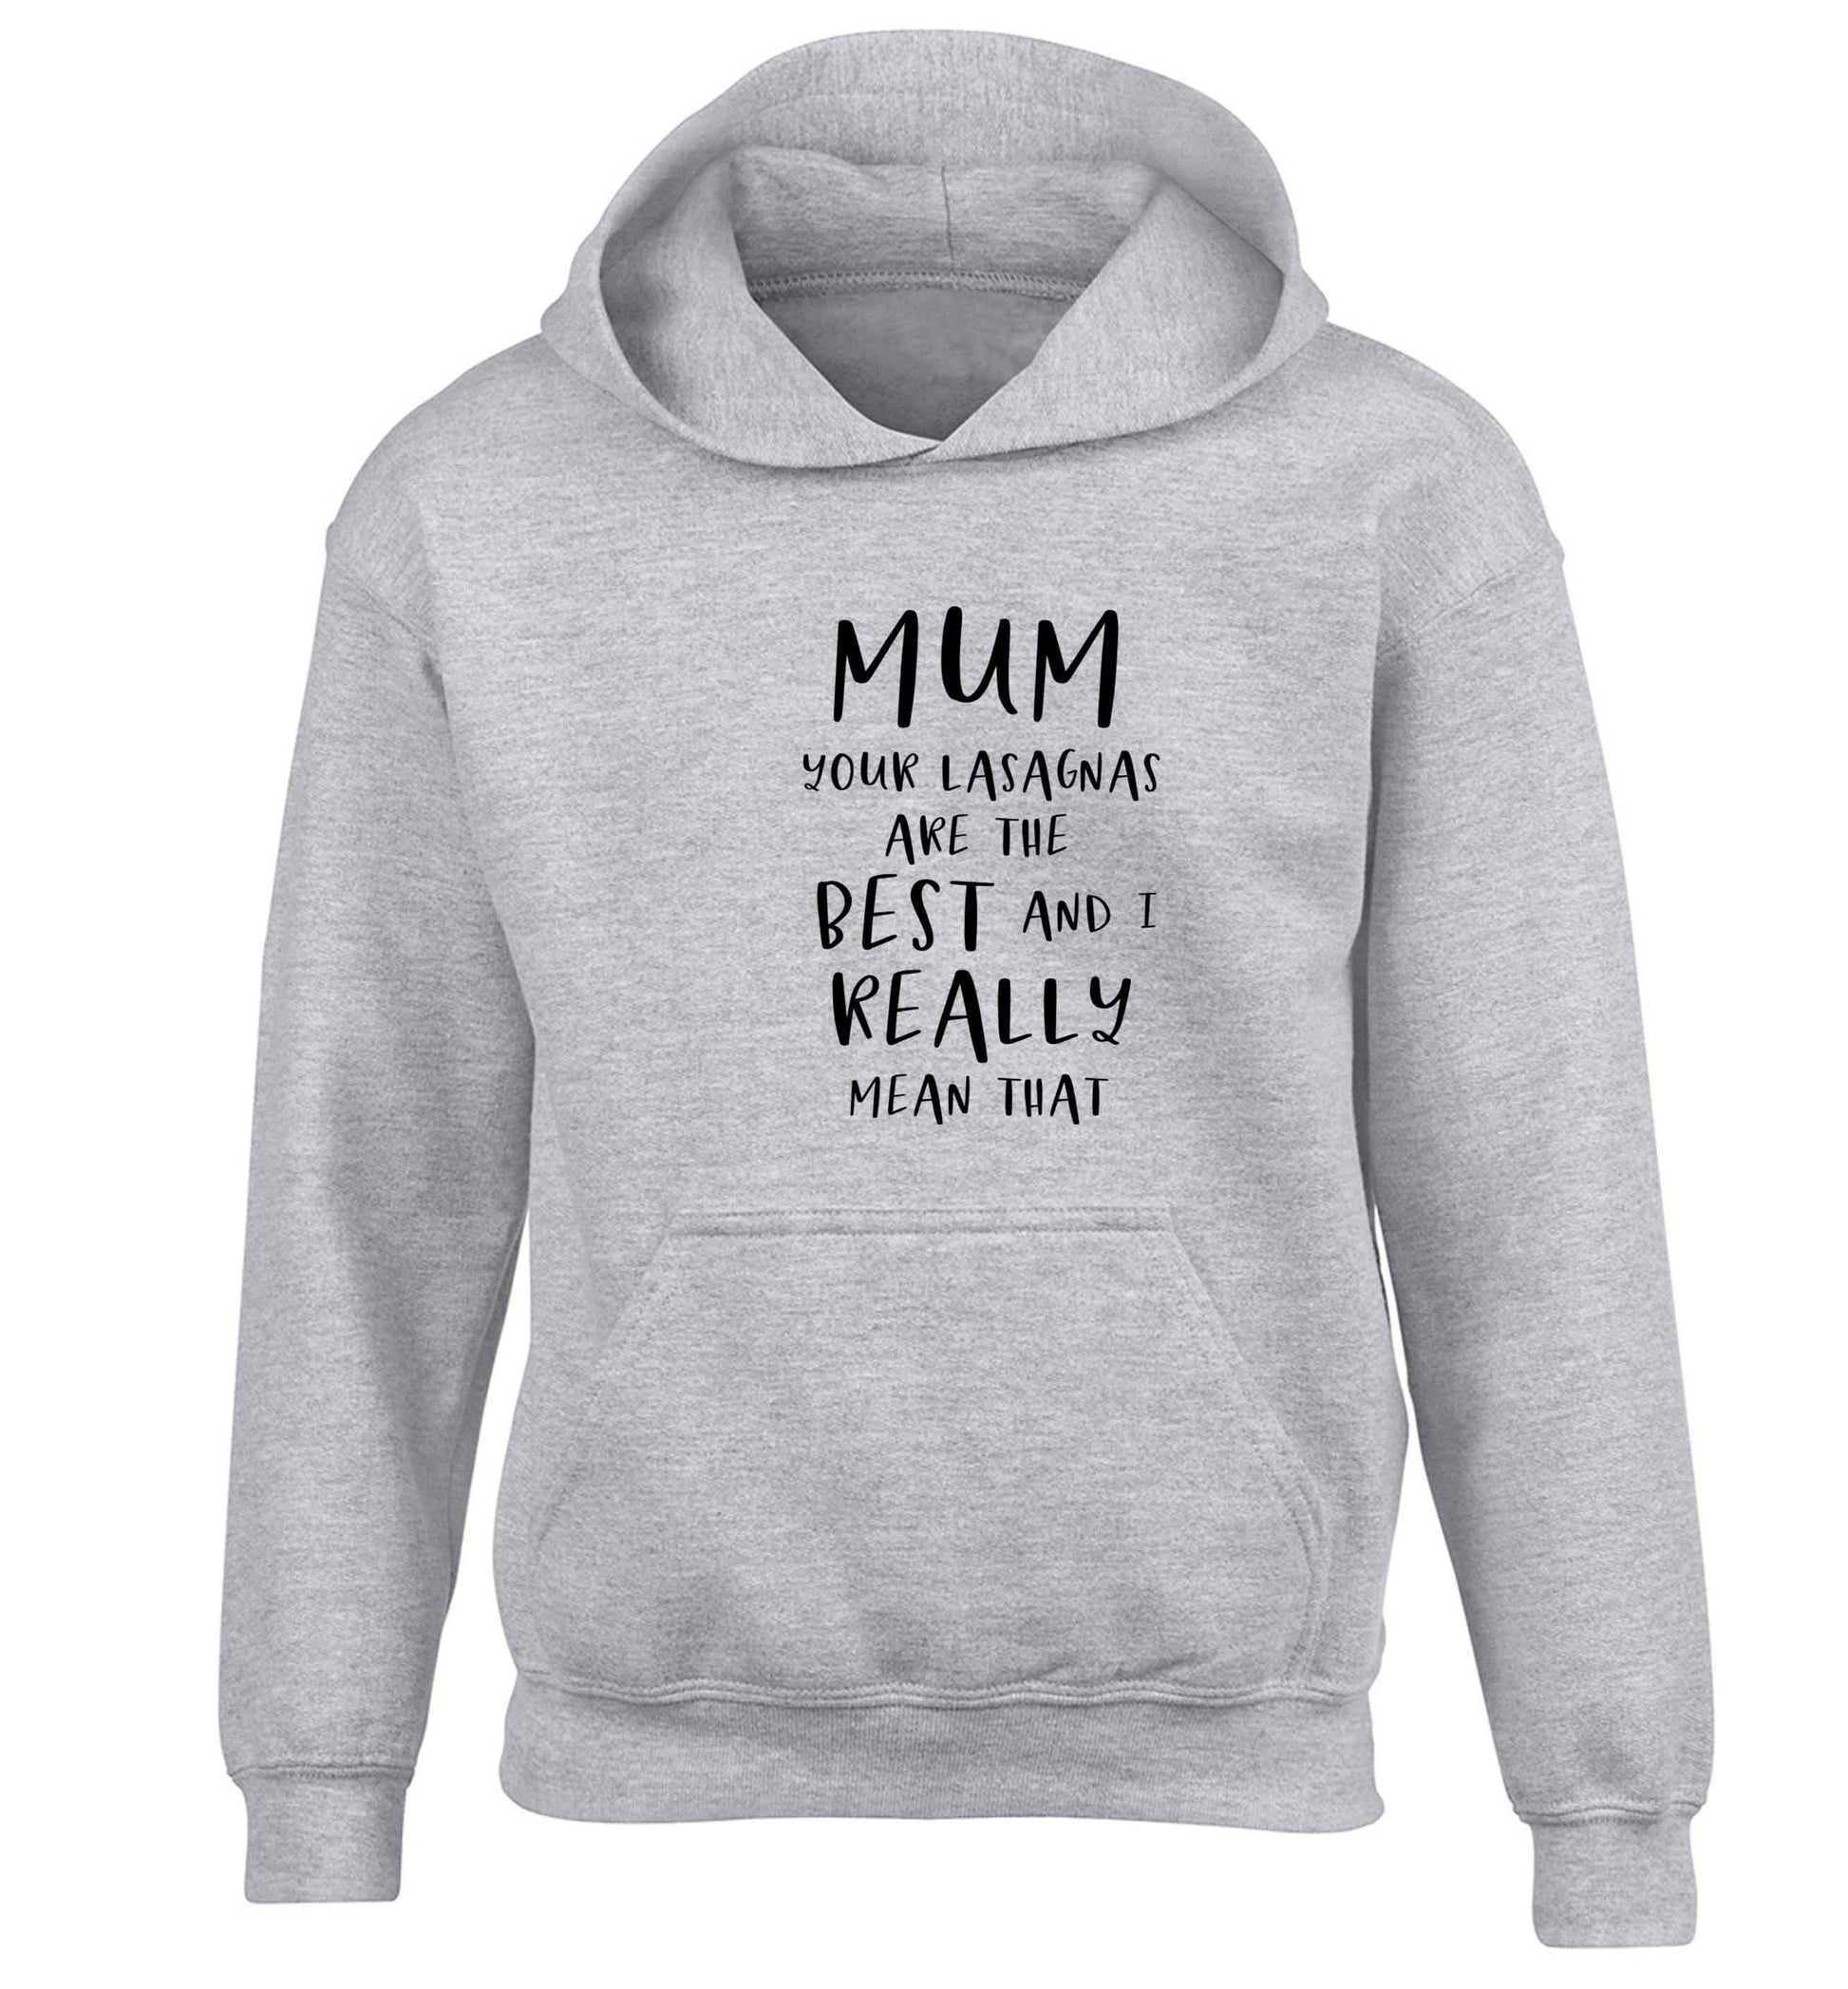 Funny gifts for your mum on mother's dayor her birthday! Mum your lasagnas are the best and I really mean that children's grey hoodie 12-13 Years